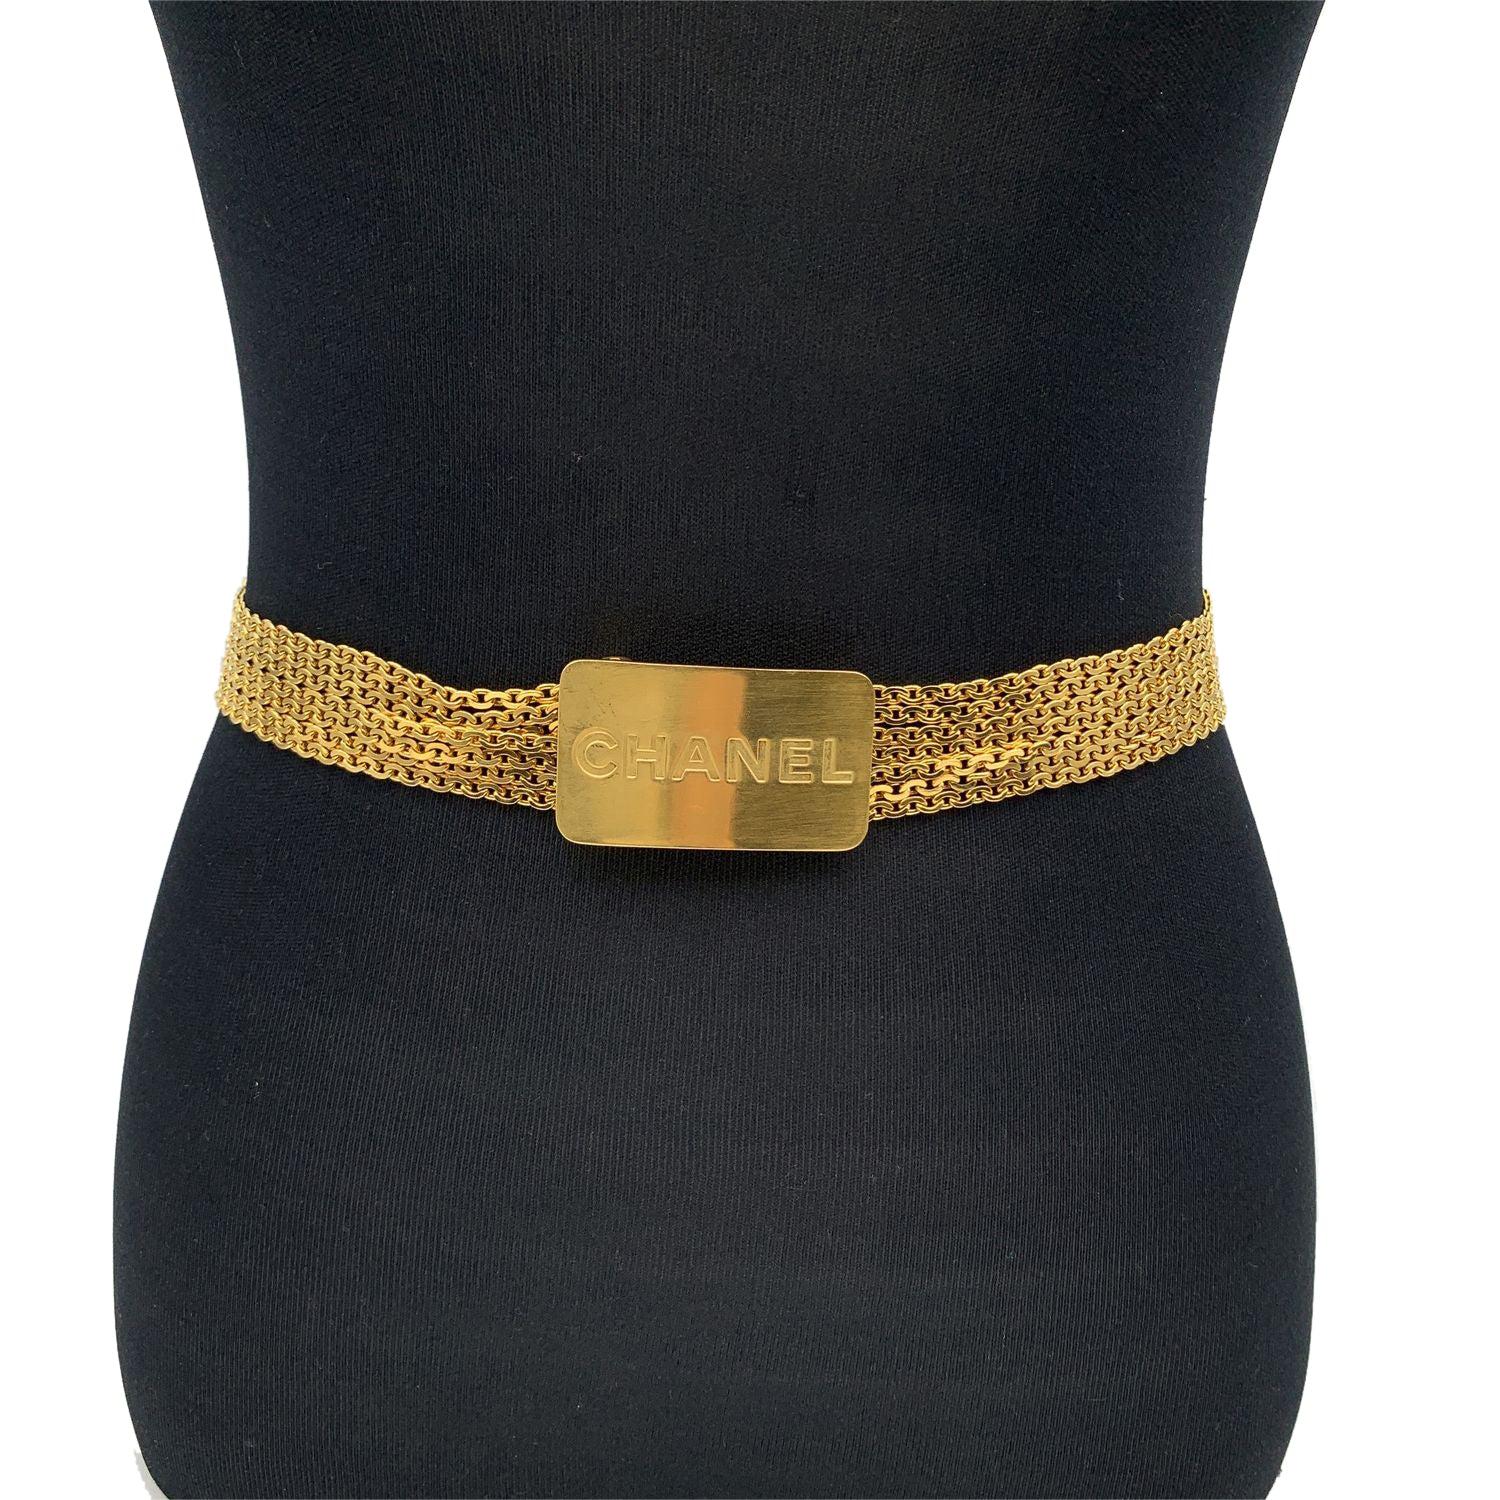 Vintage Chanel gold metal multichain belt . Period/Era: 1996. It is very versatile and will complete every look. It features a rectangular tab with engraved CHANEL signature. Hook closure. Total length: 27.5 inches - 69.8 cm . Height: 1 inch - 2.5